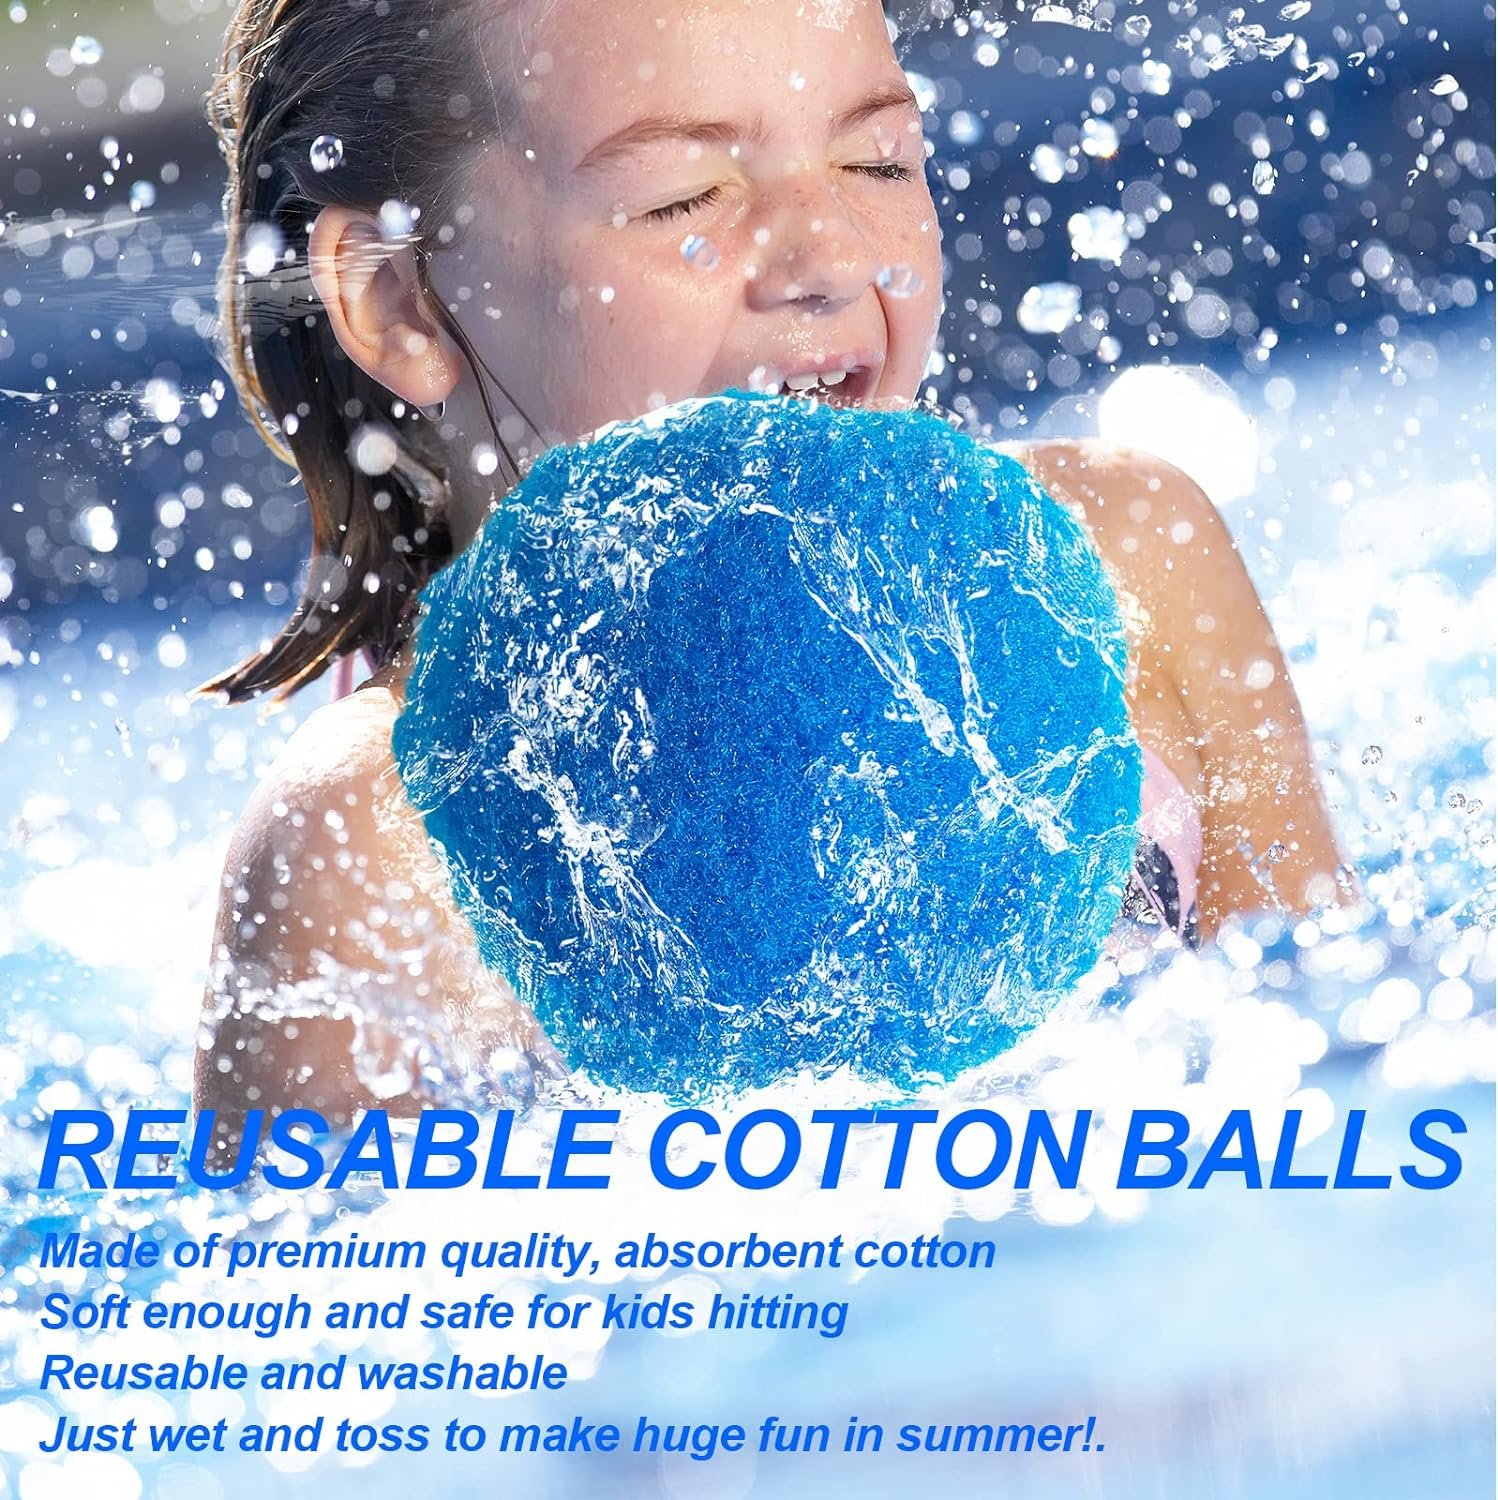 60 Pcs Reusable Water Balls, Reusable Water Balloons for Outdoor Toys and Games, Water Toys for Kids and Adults Boys and Girls - Summer Toys Ball for Pool and Backyard Fun